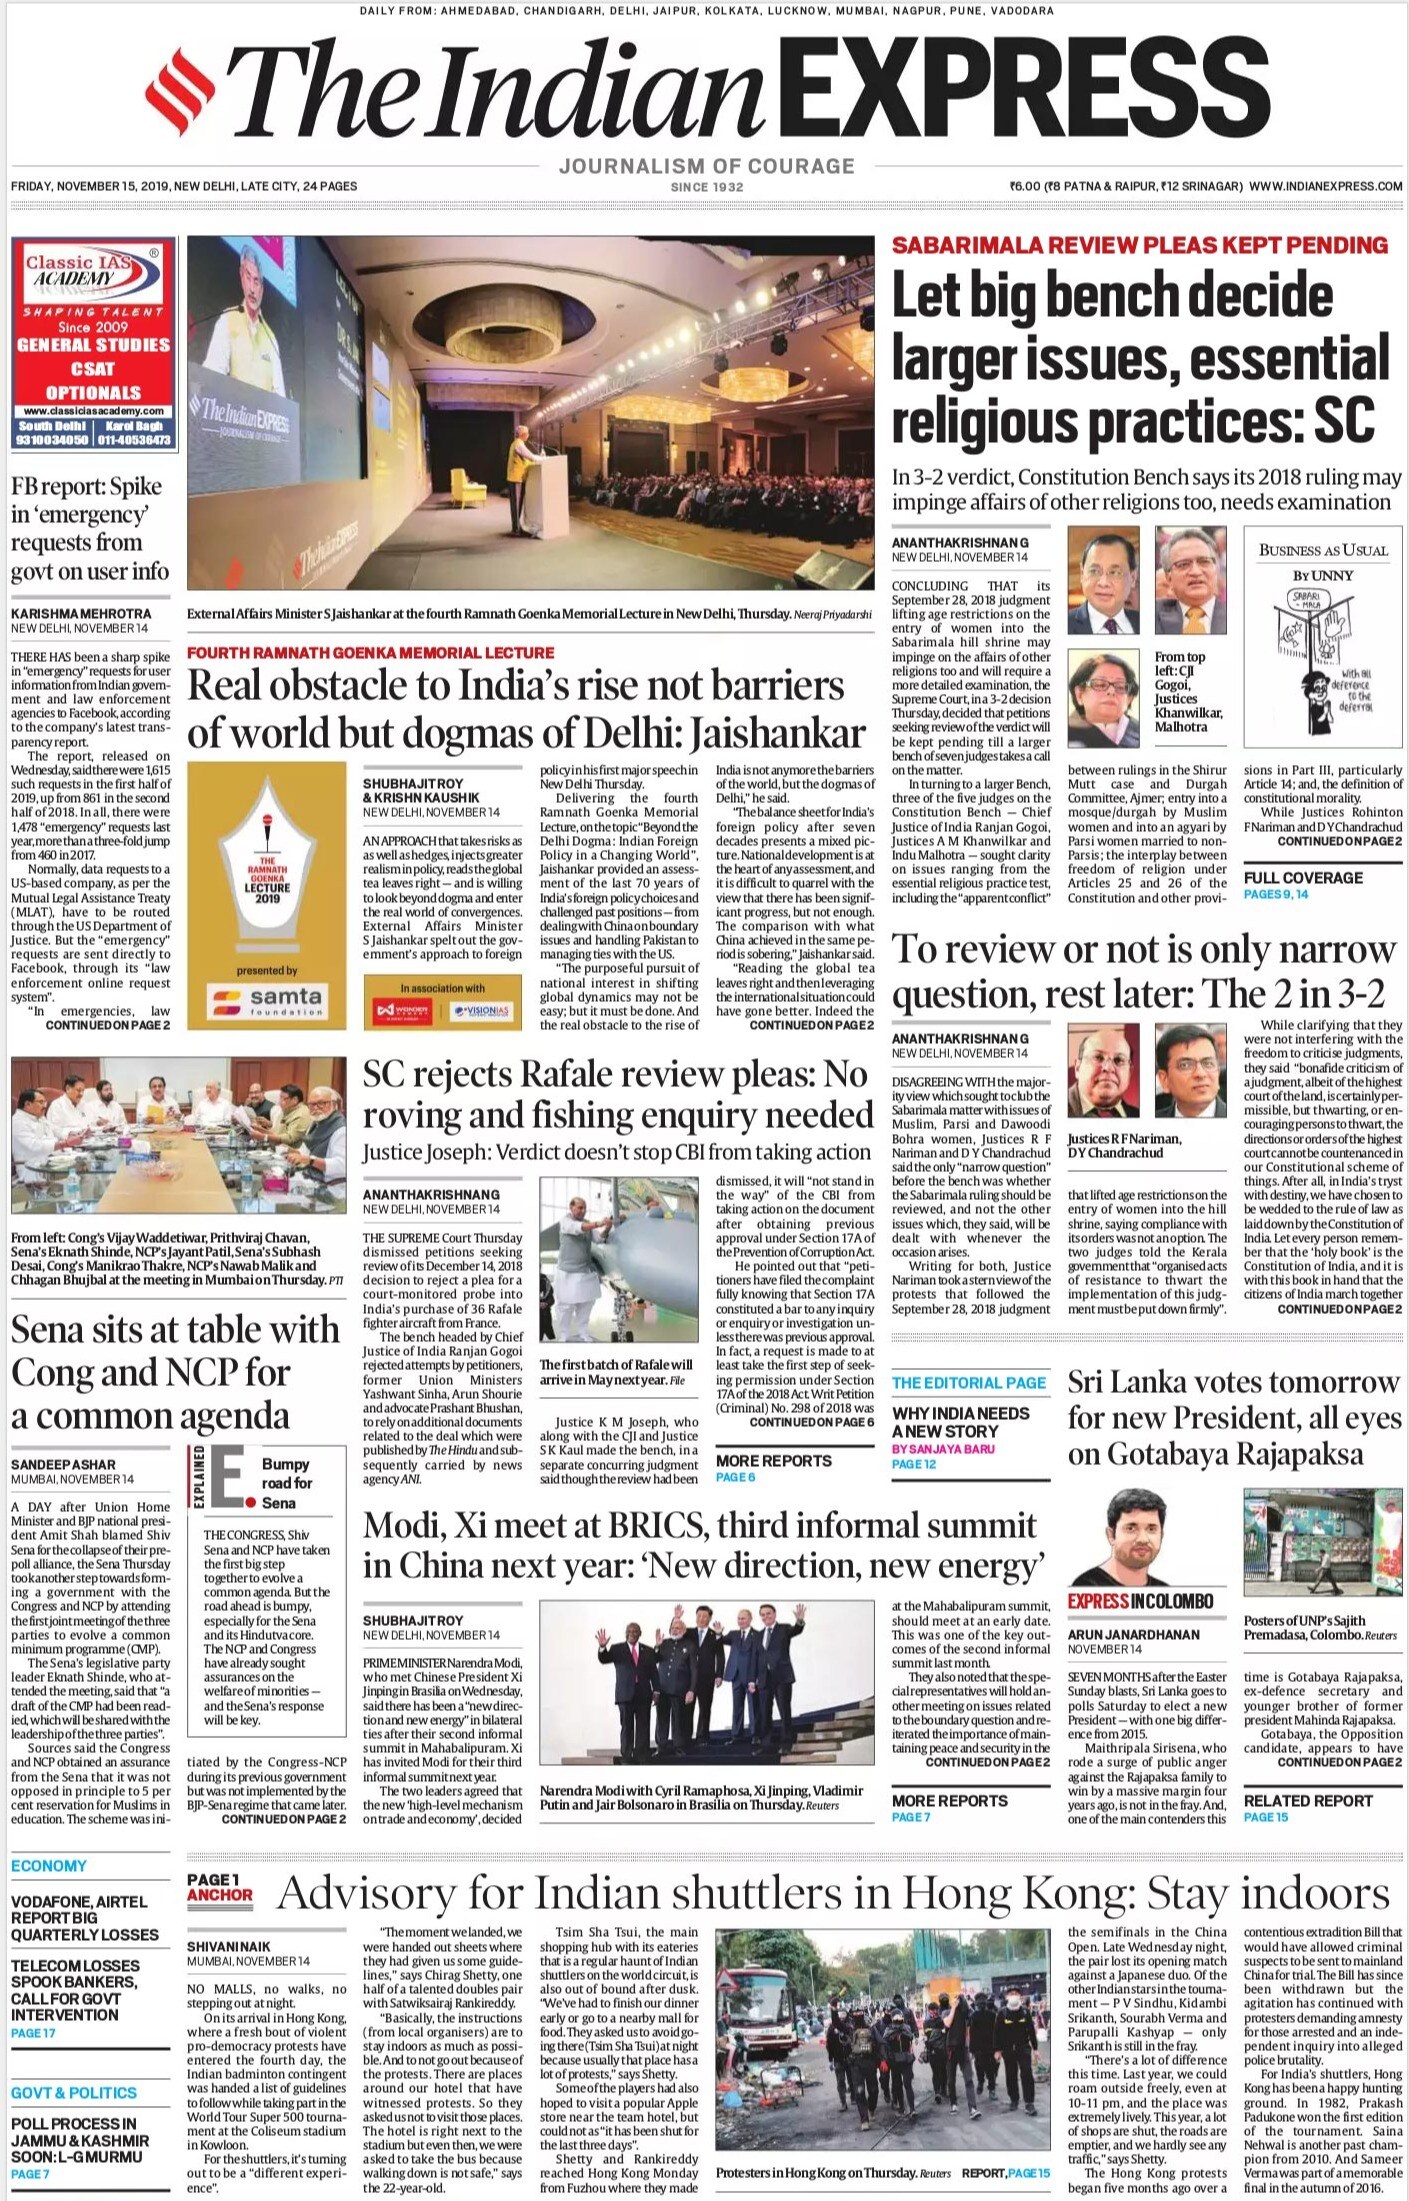 Newspaper Headlines: Top Court Rejects Review Petitions On Rafale Fighter Jet Deal, Other Big Stories